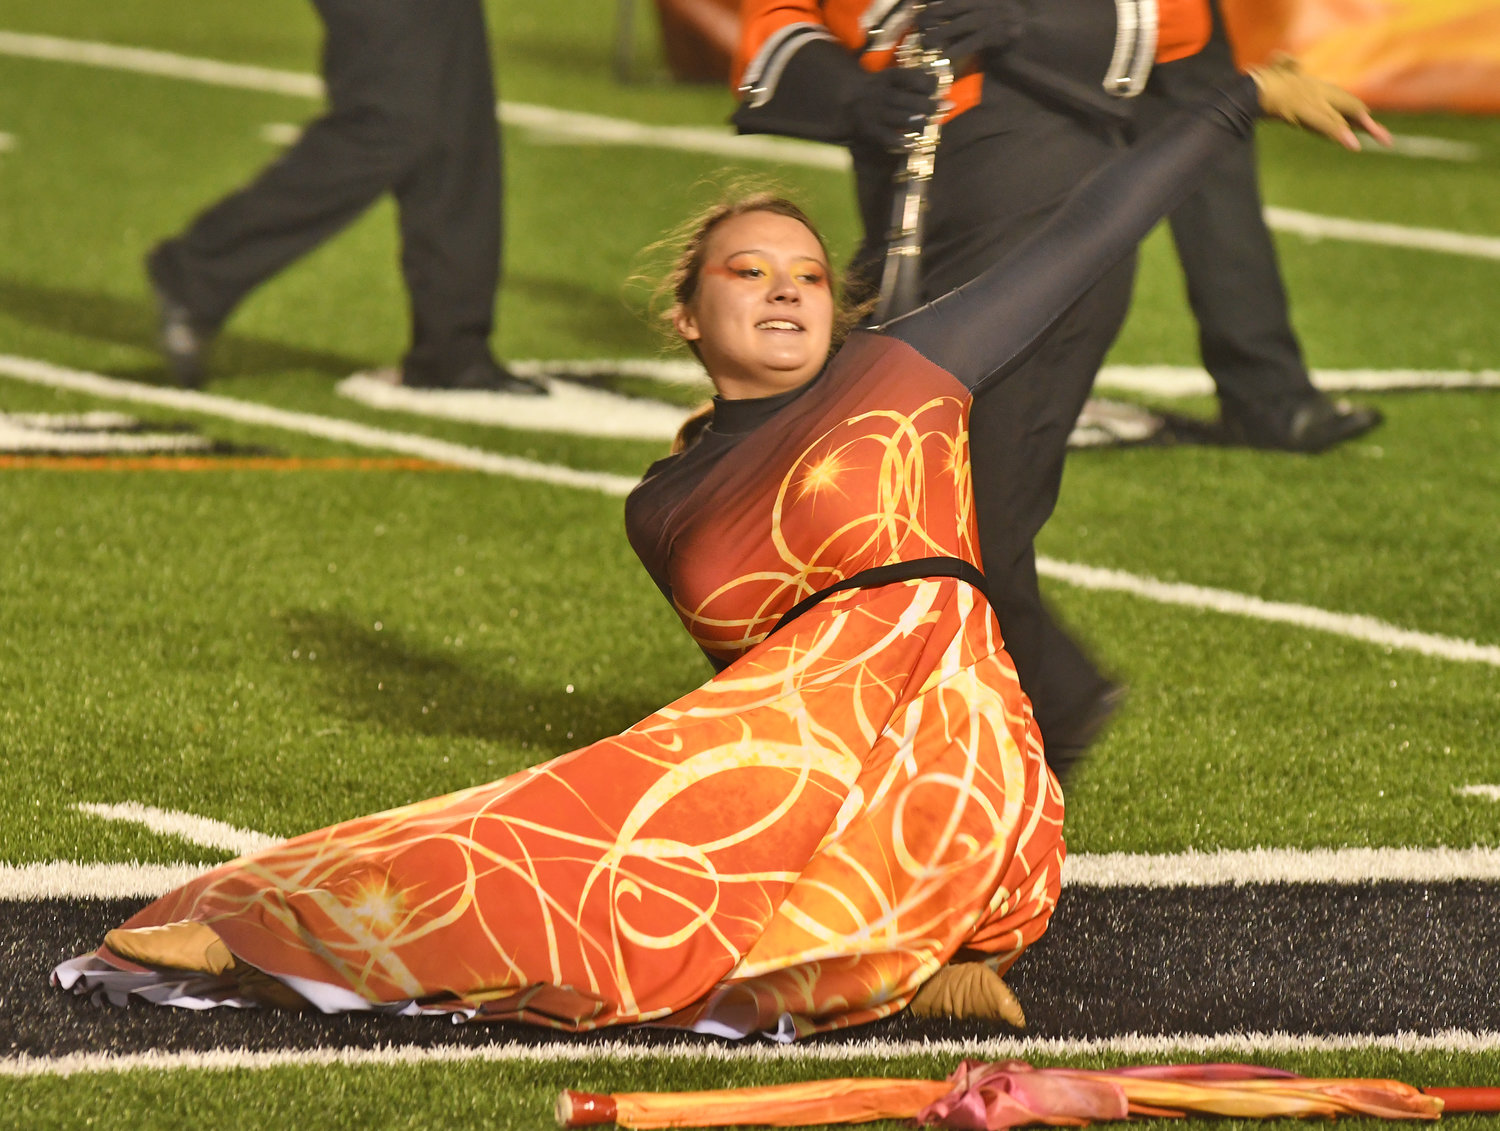 ON FIRE — The RFA Marching band delivered a striking performance on Wednesday night at RFA Stadium. Above, Colorguard member Karabrie Wiggins strikes a pose during the band’s performance of “Color of Fire.”